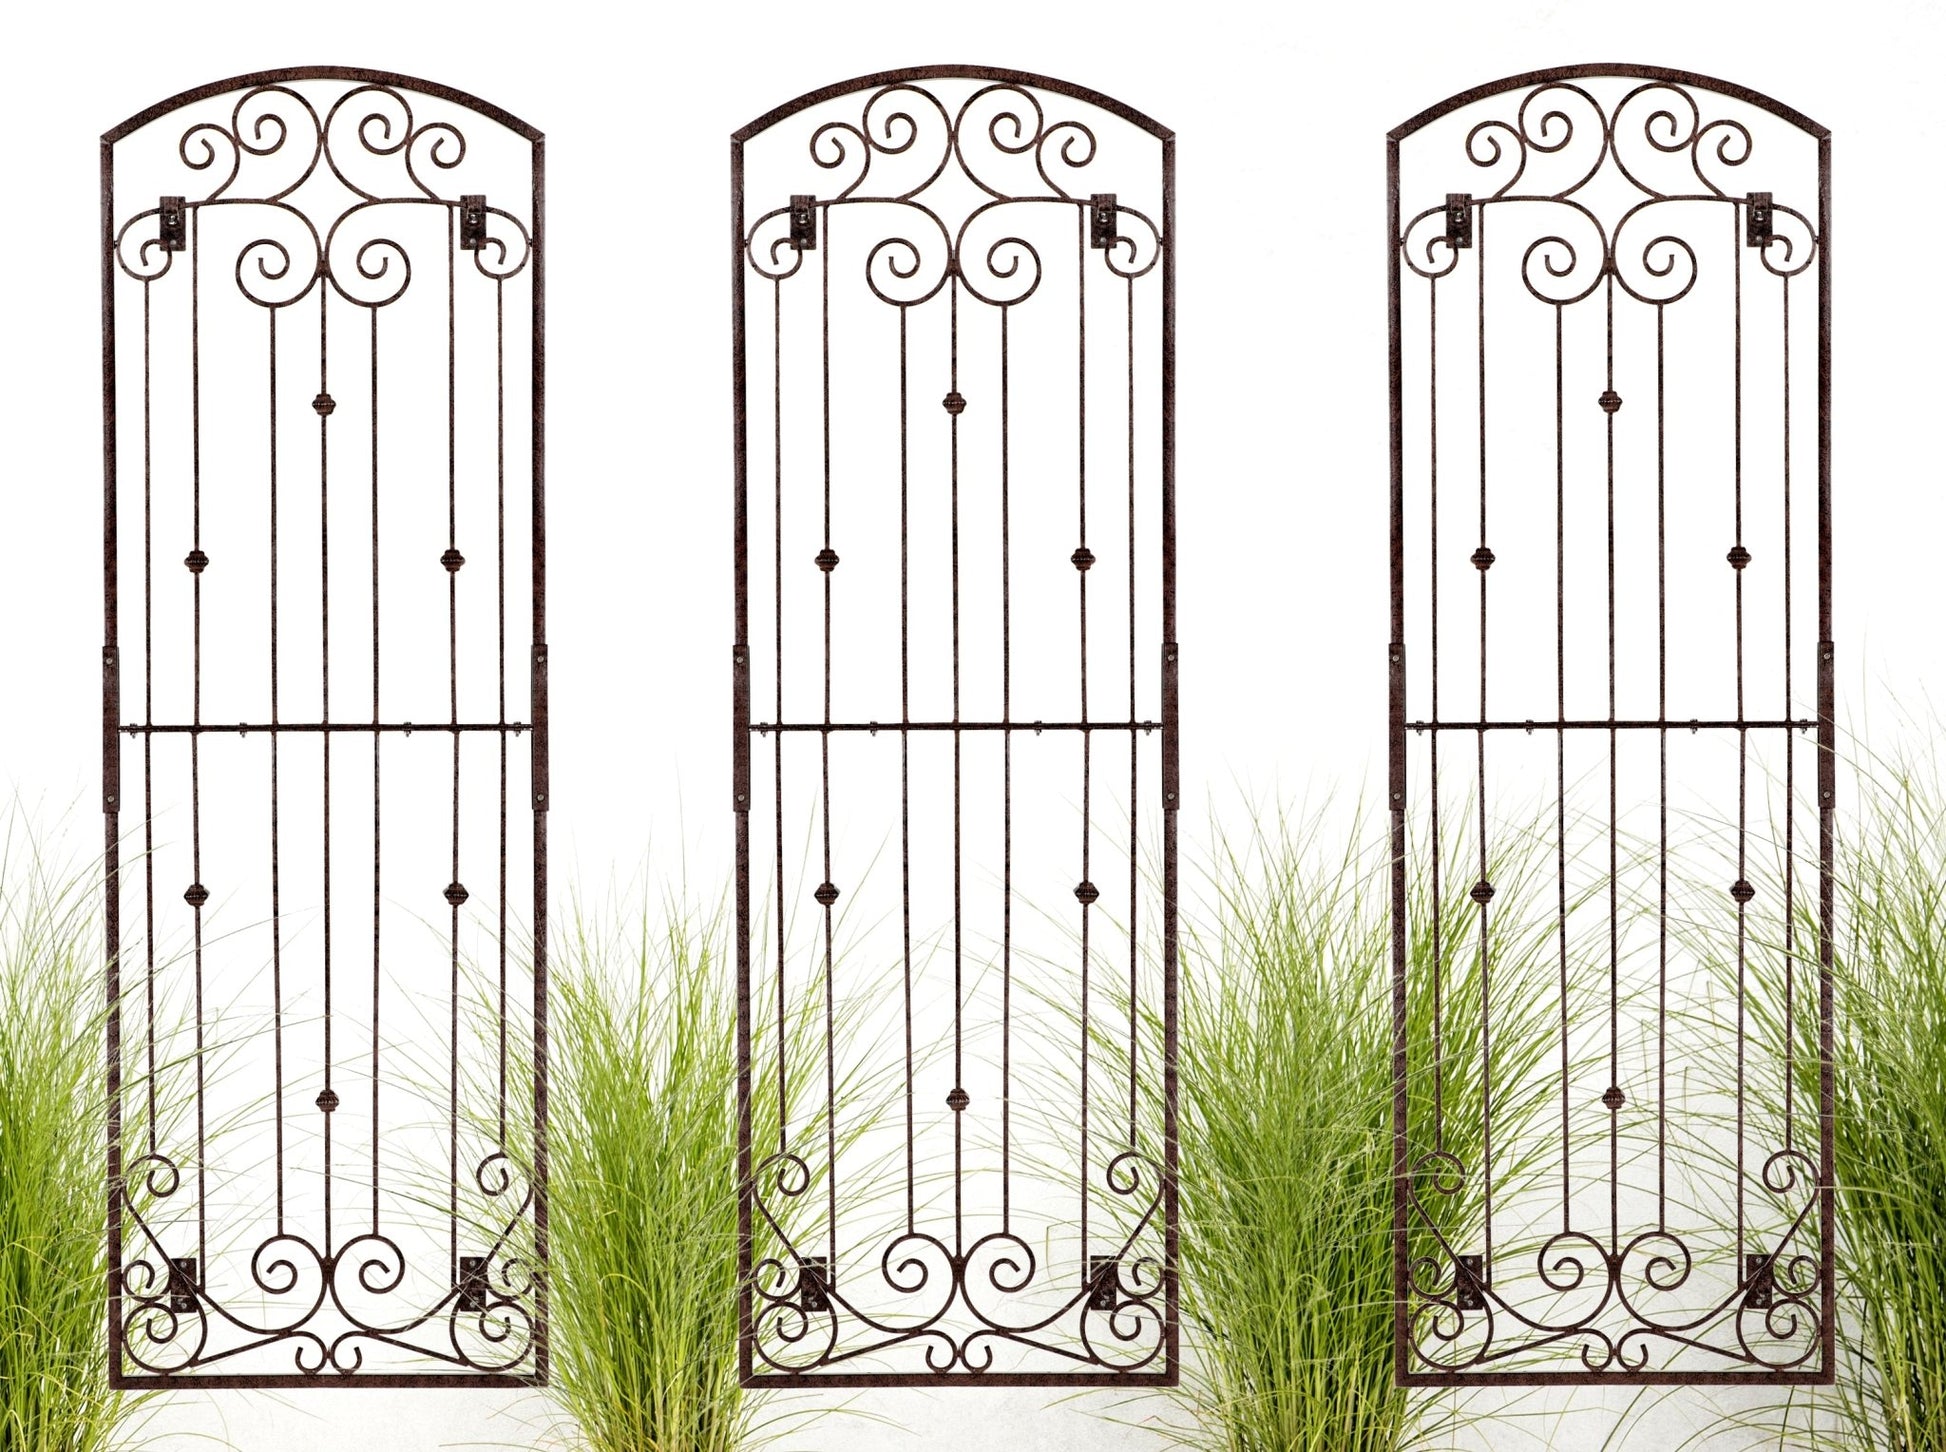 H Potter - Set of 3 - 8 Foot Wrought Iron Garden Trellis Metal Wall Screen with Wall Mounting Brackets - H Potter